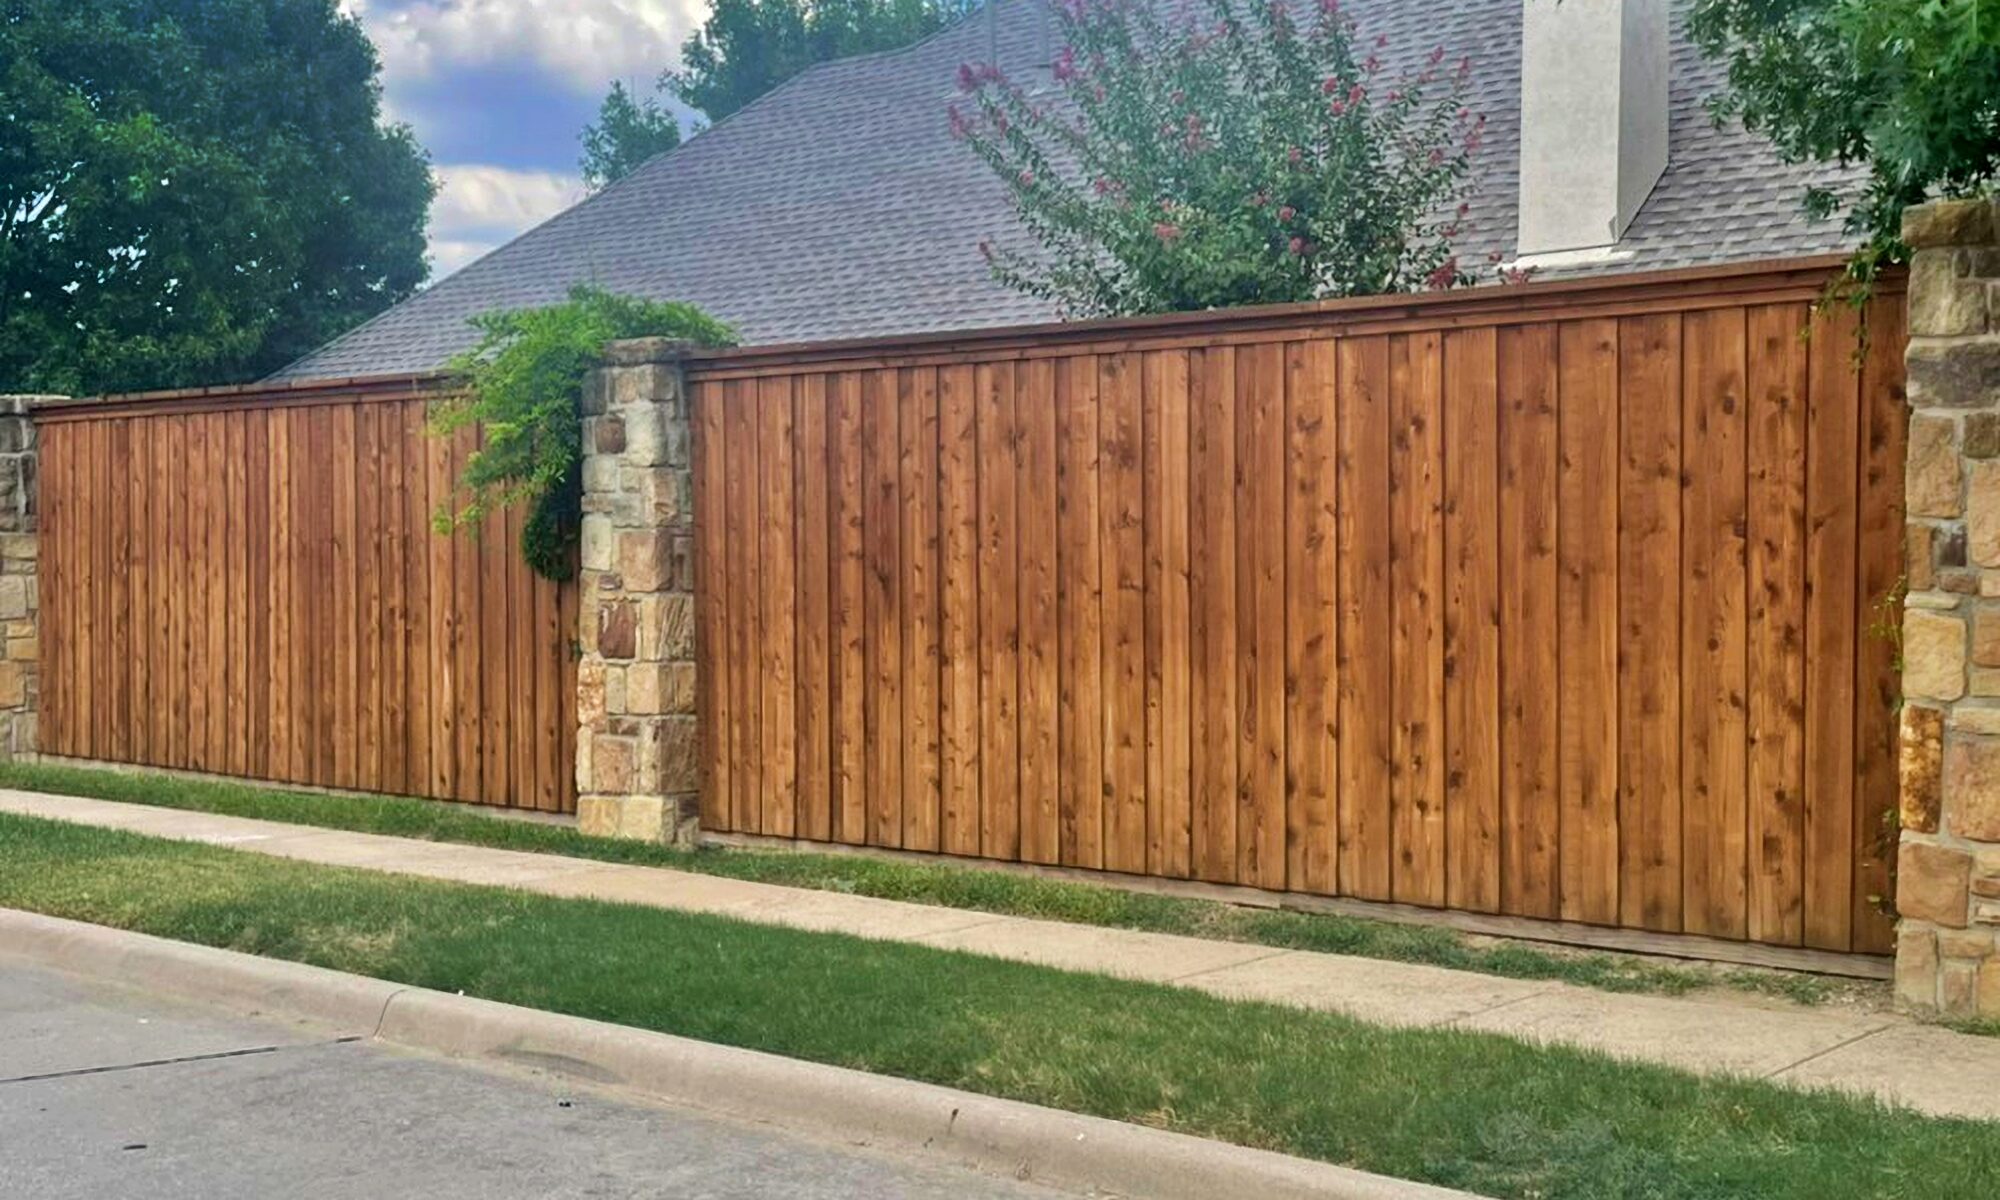 Selecting the Right Fence Material for You